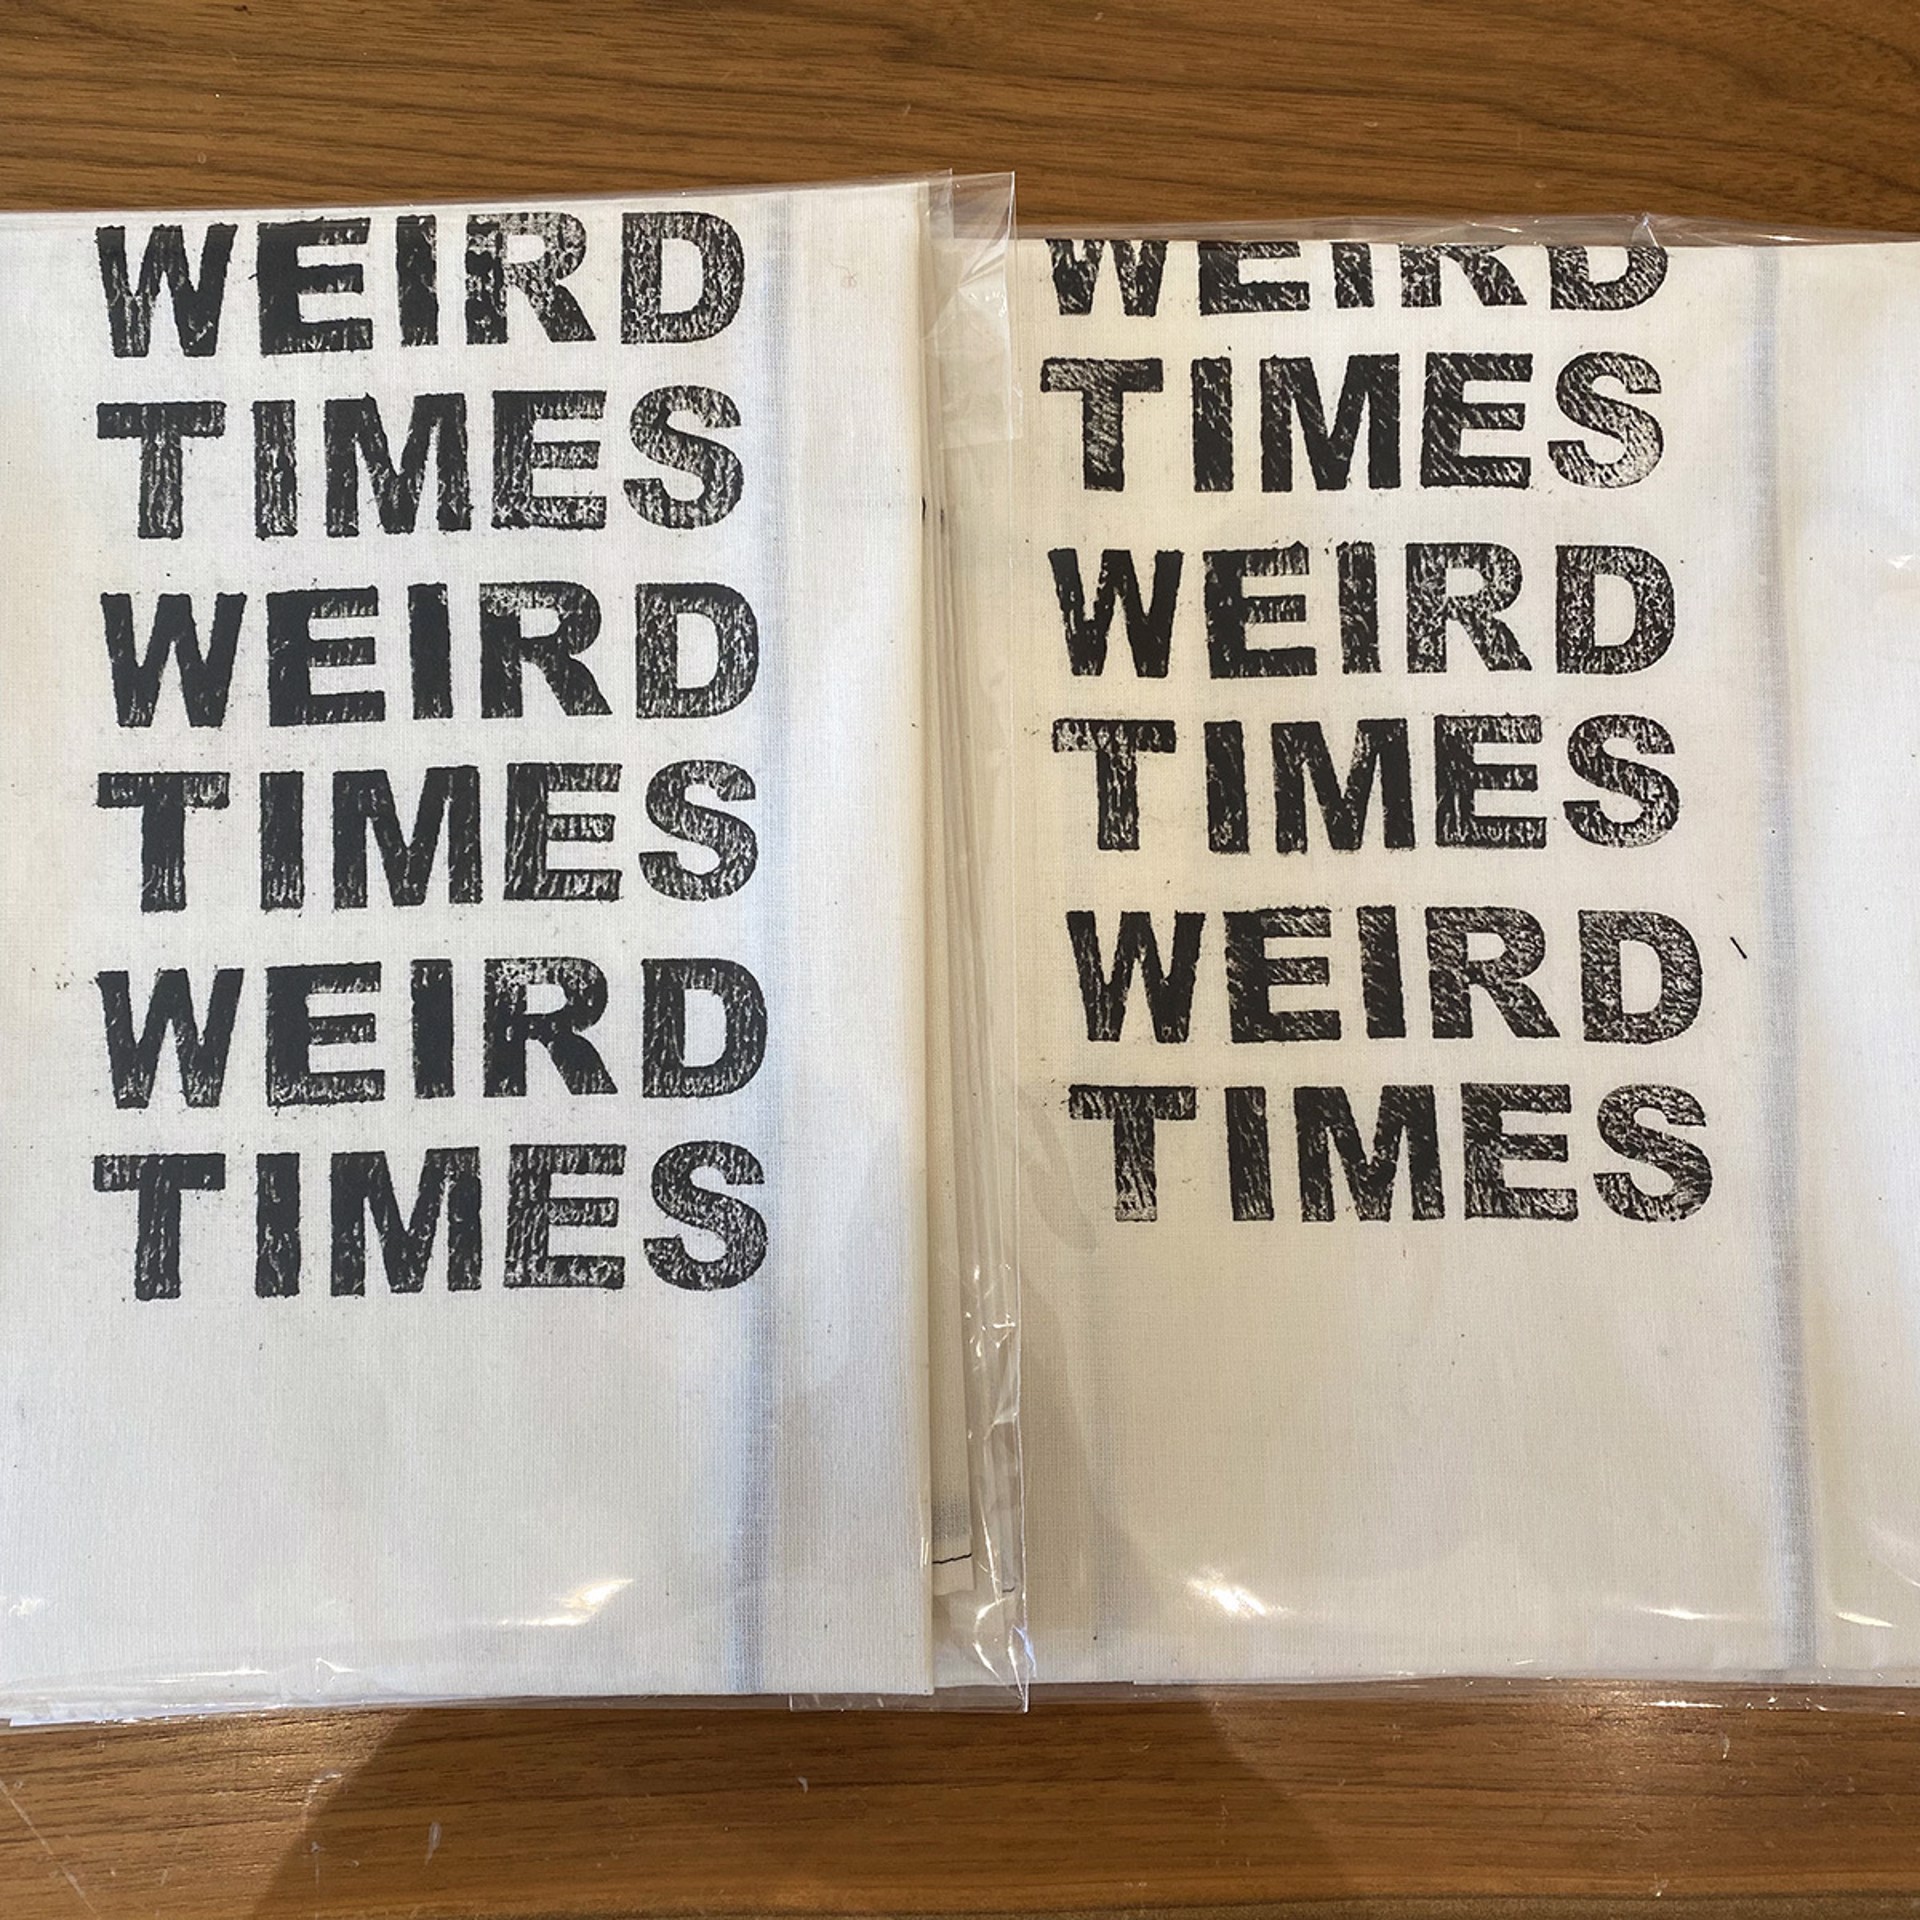 Weird Times Tea Towel, White Cotton with Black Stitching by Liz Pead